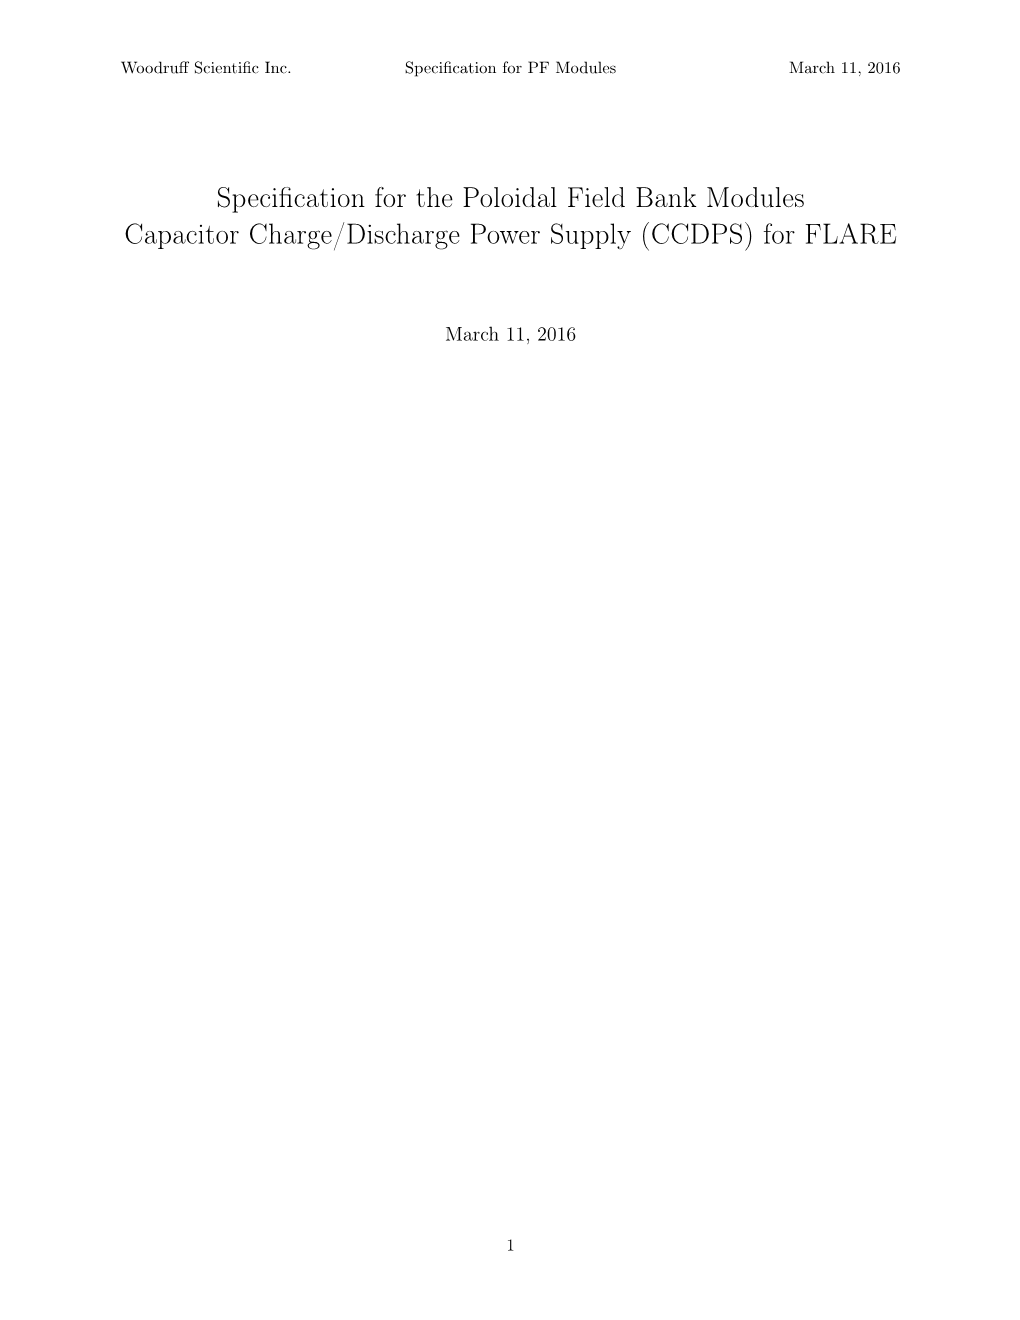 Specification for the Poloidal Field Bank Modules Capacitor